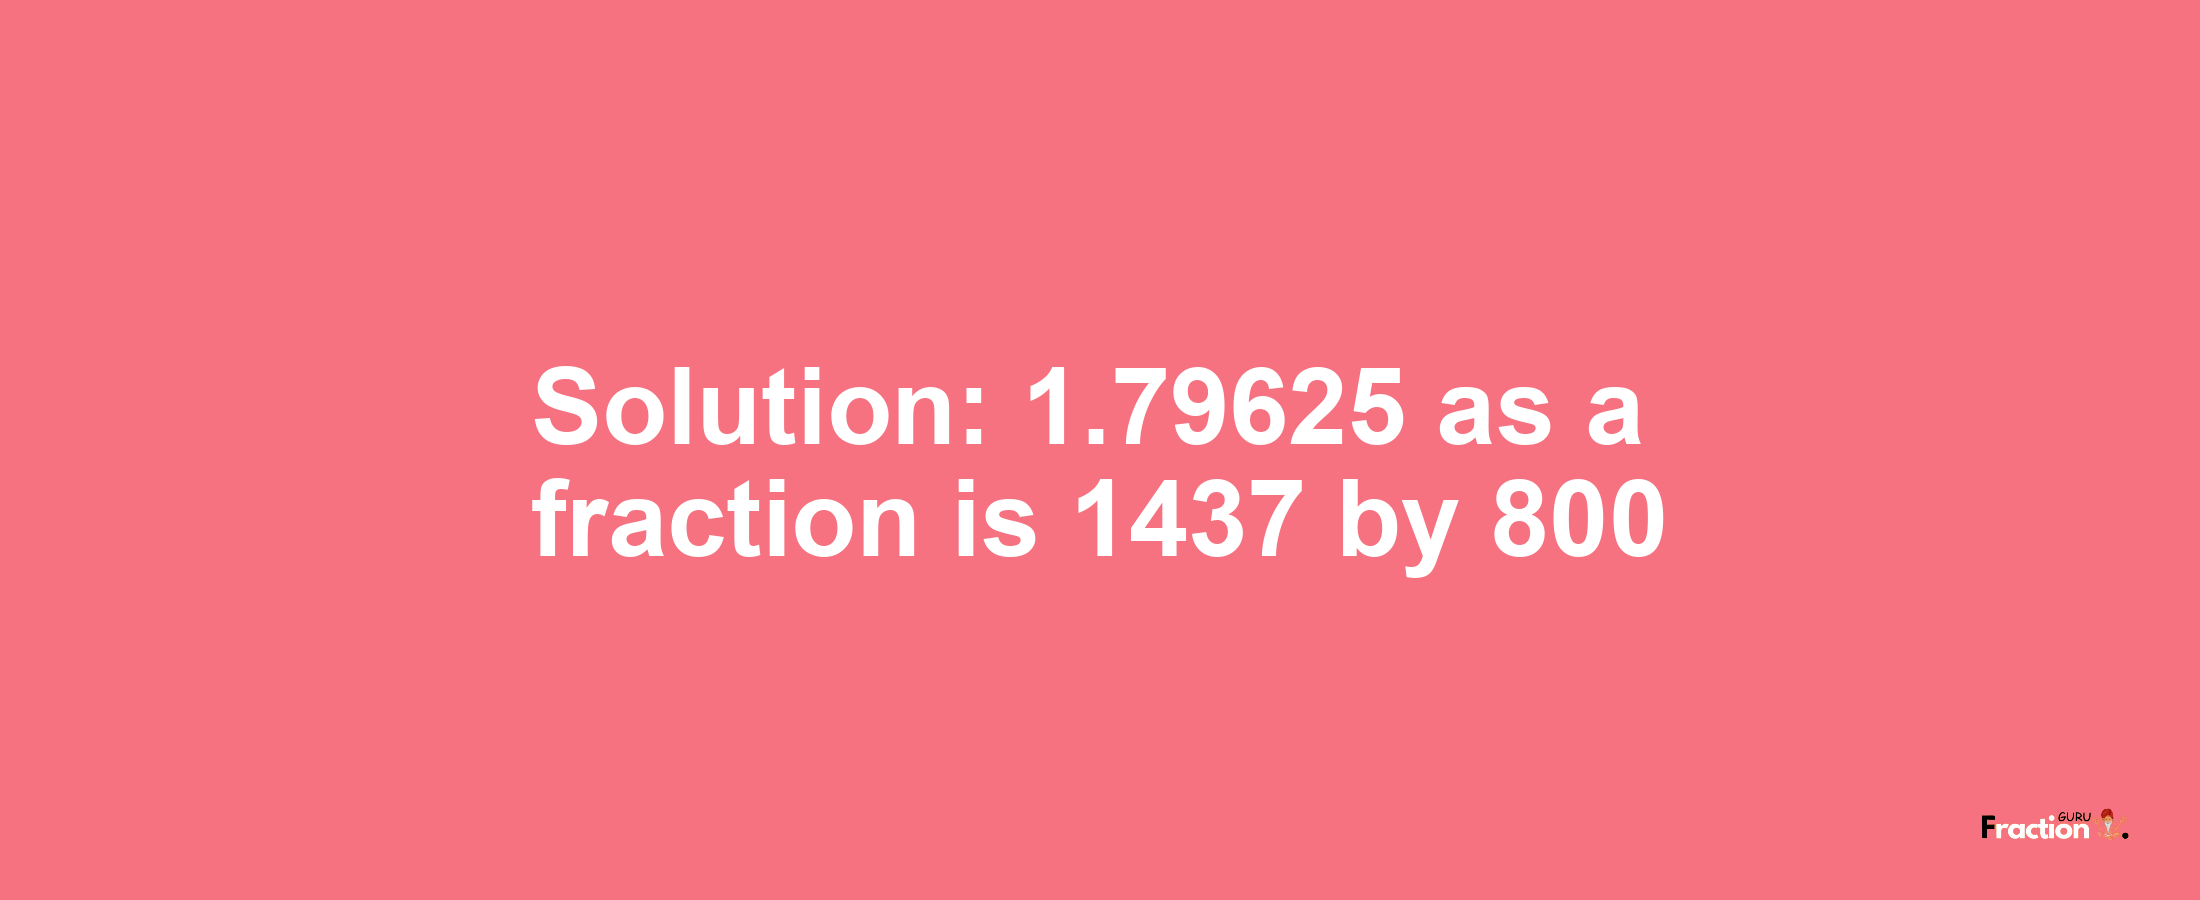 Solution:1.79625 as a fraction is 1437/800